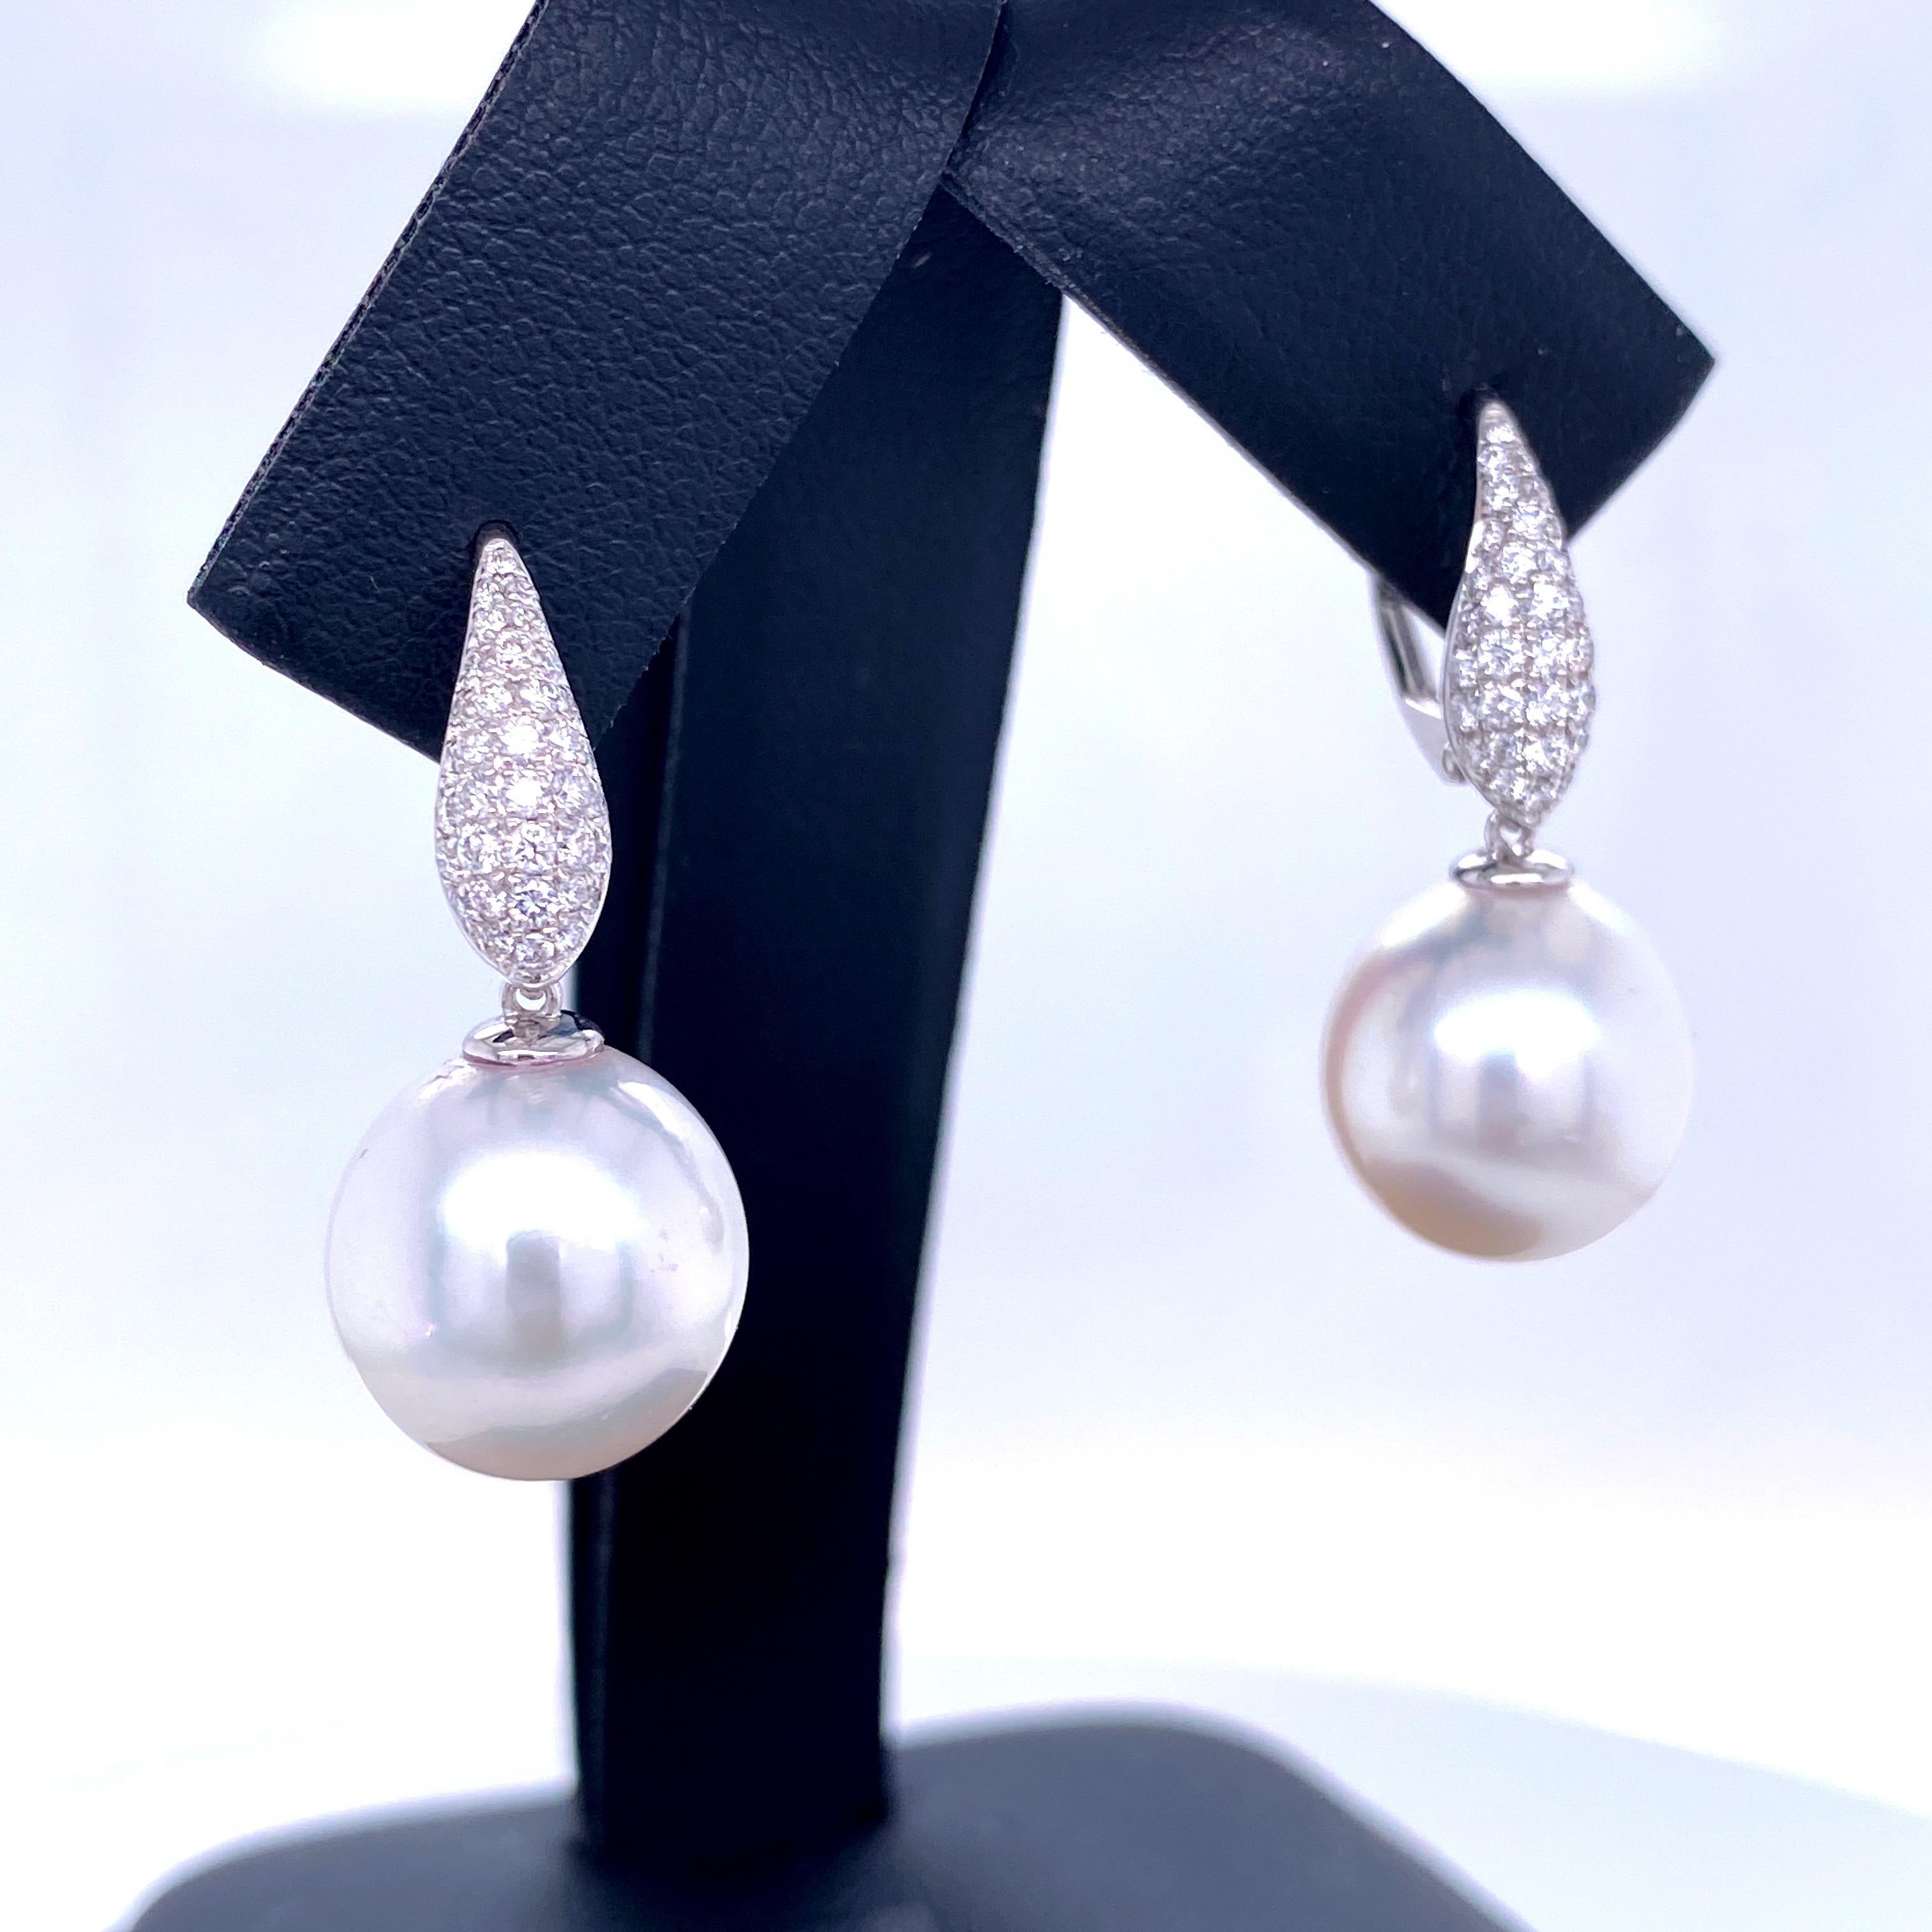 18K White gold drop earrings featuring 70 round brilliants weighing 0.45 carats with two South Sea Pearls measuring 11-12 mm. 
Color G
Clarity SI

Pearl can be changed to Pink, Golden or Tahitian upon request.
Price subject to change. 